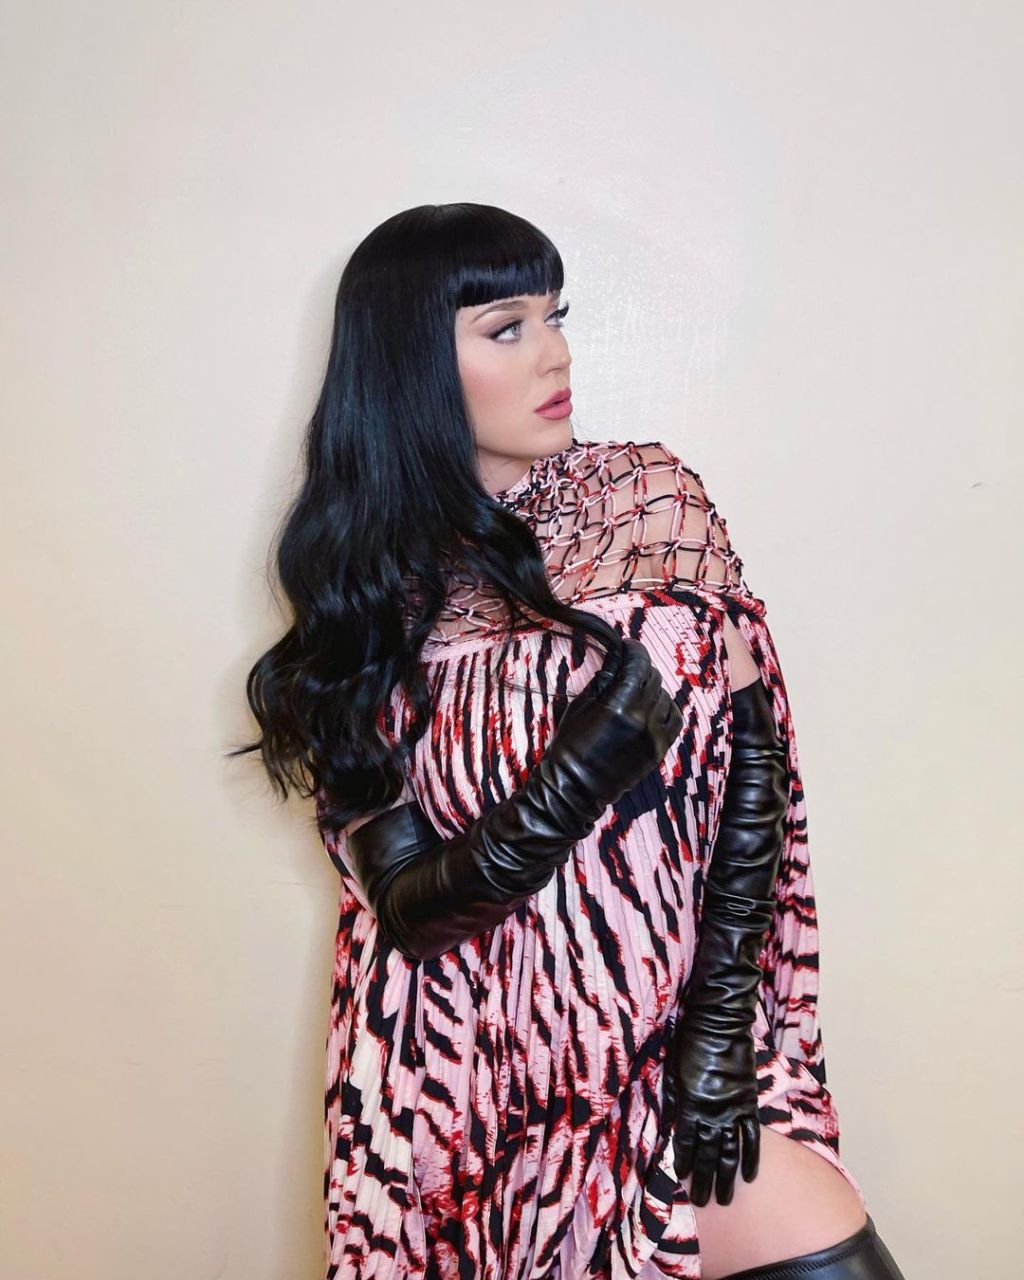 Katy Perry Black Hairs 2017 Wallpapers